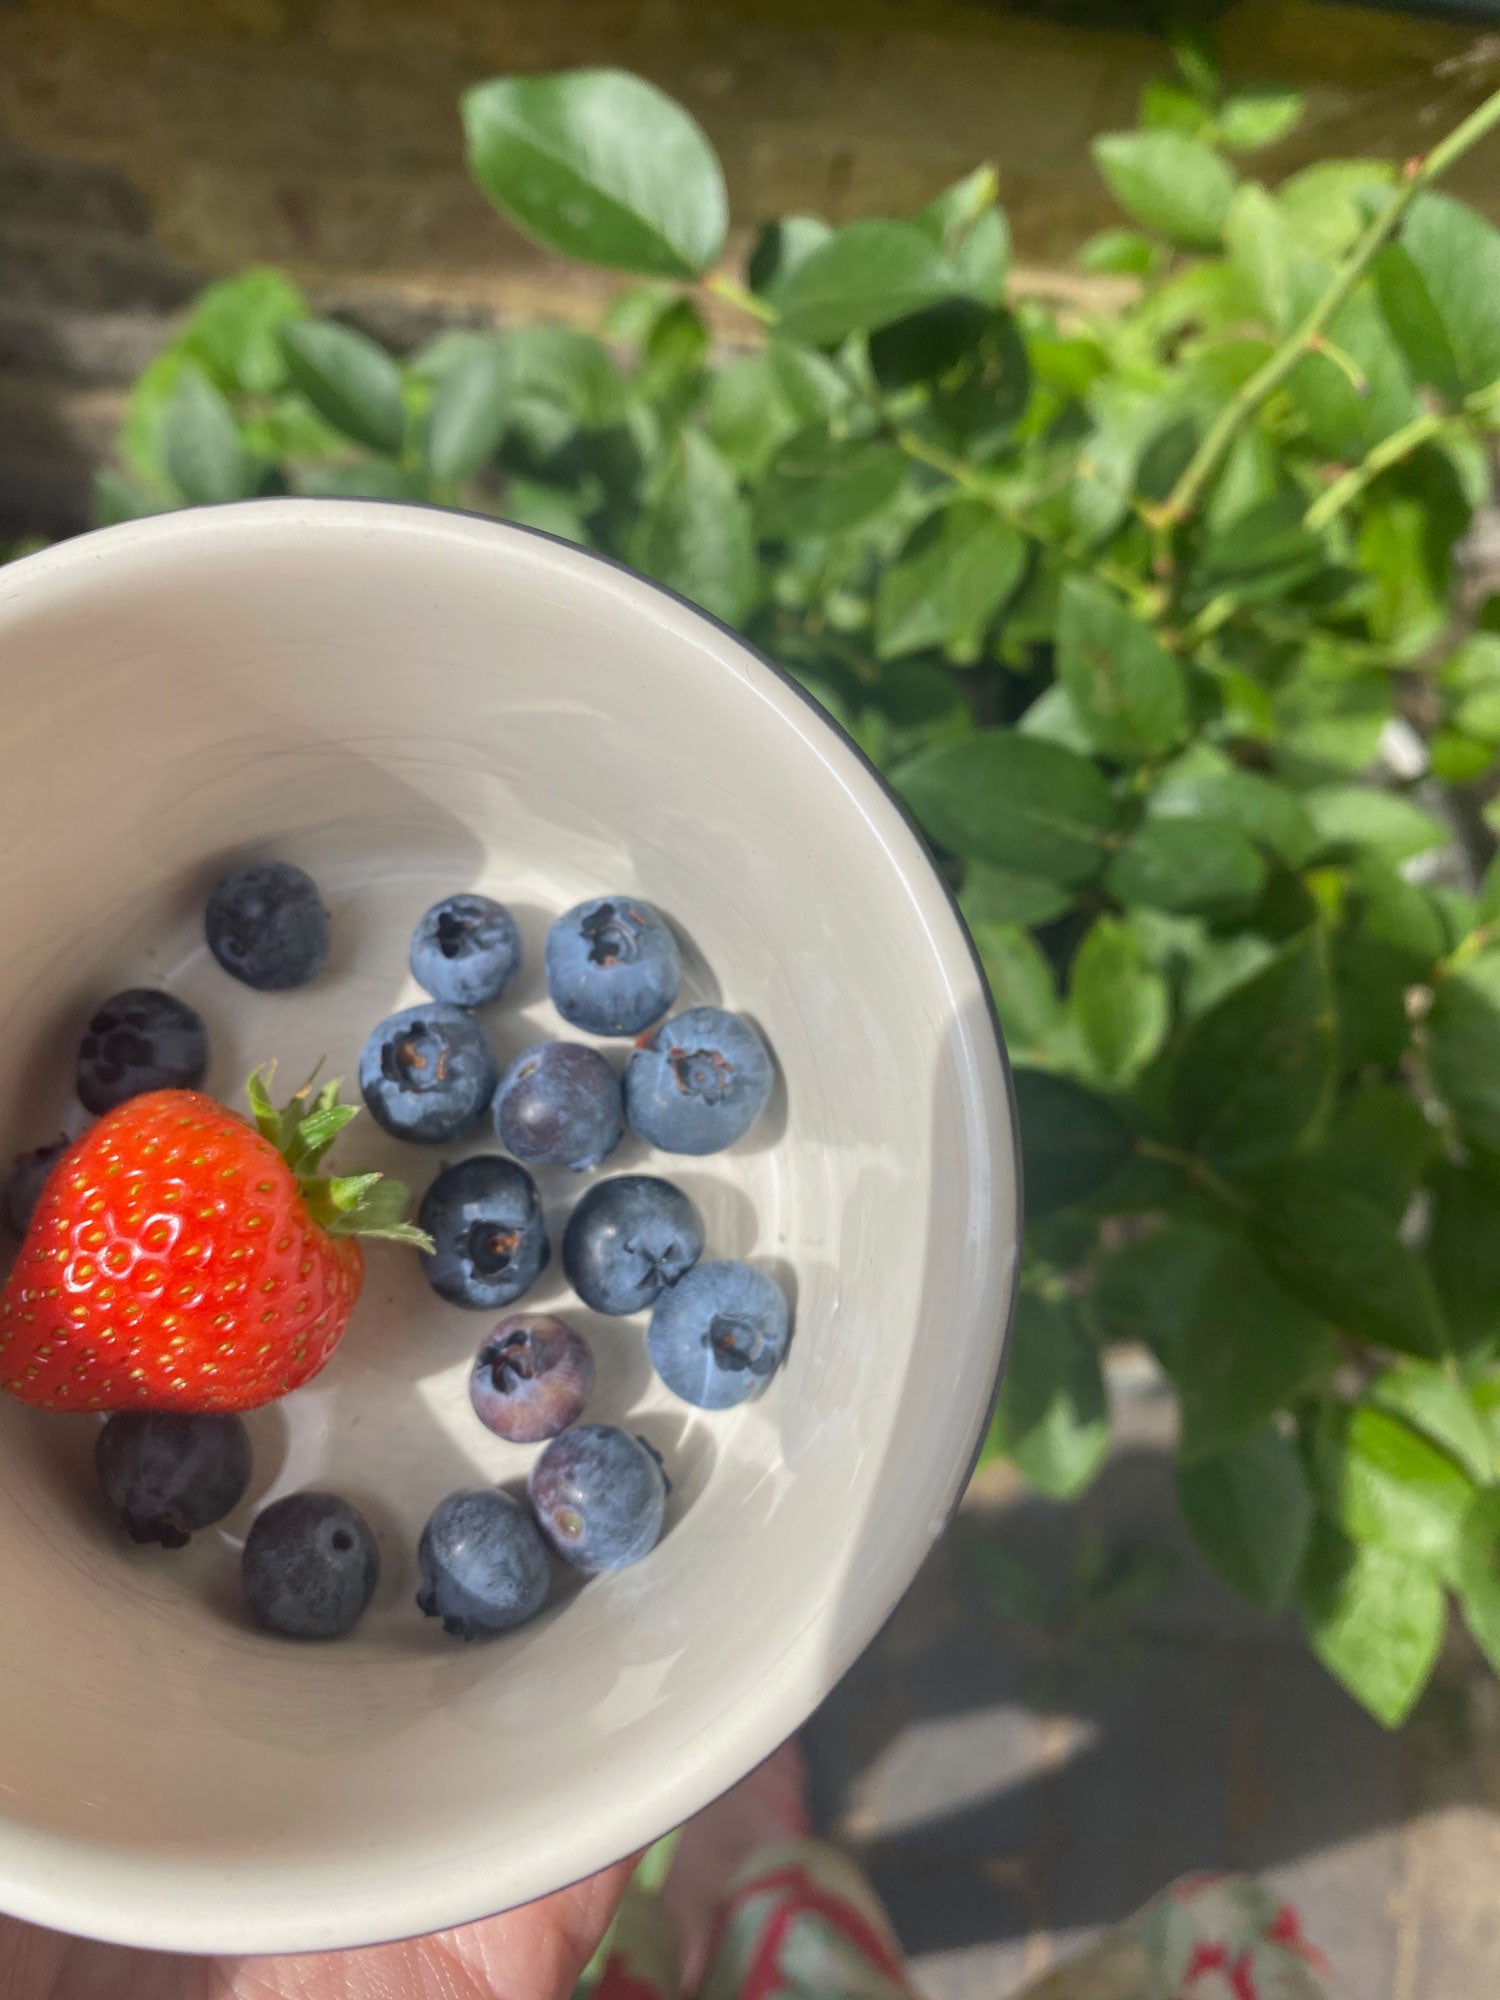 Freshly picked blueberries and strawberries from the garden